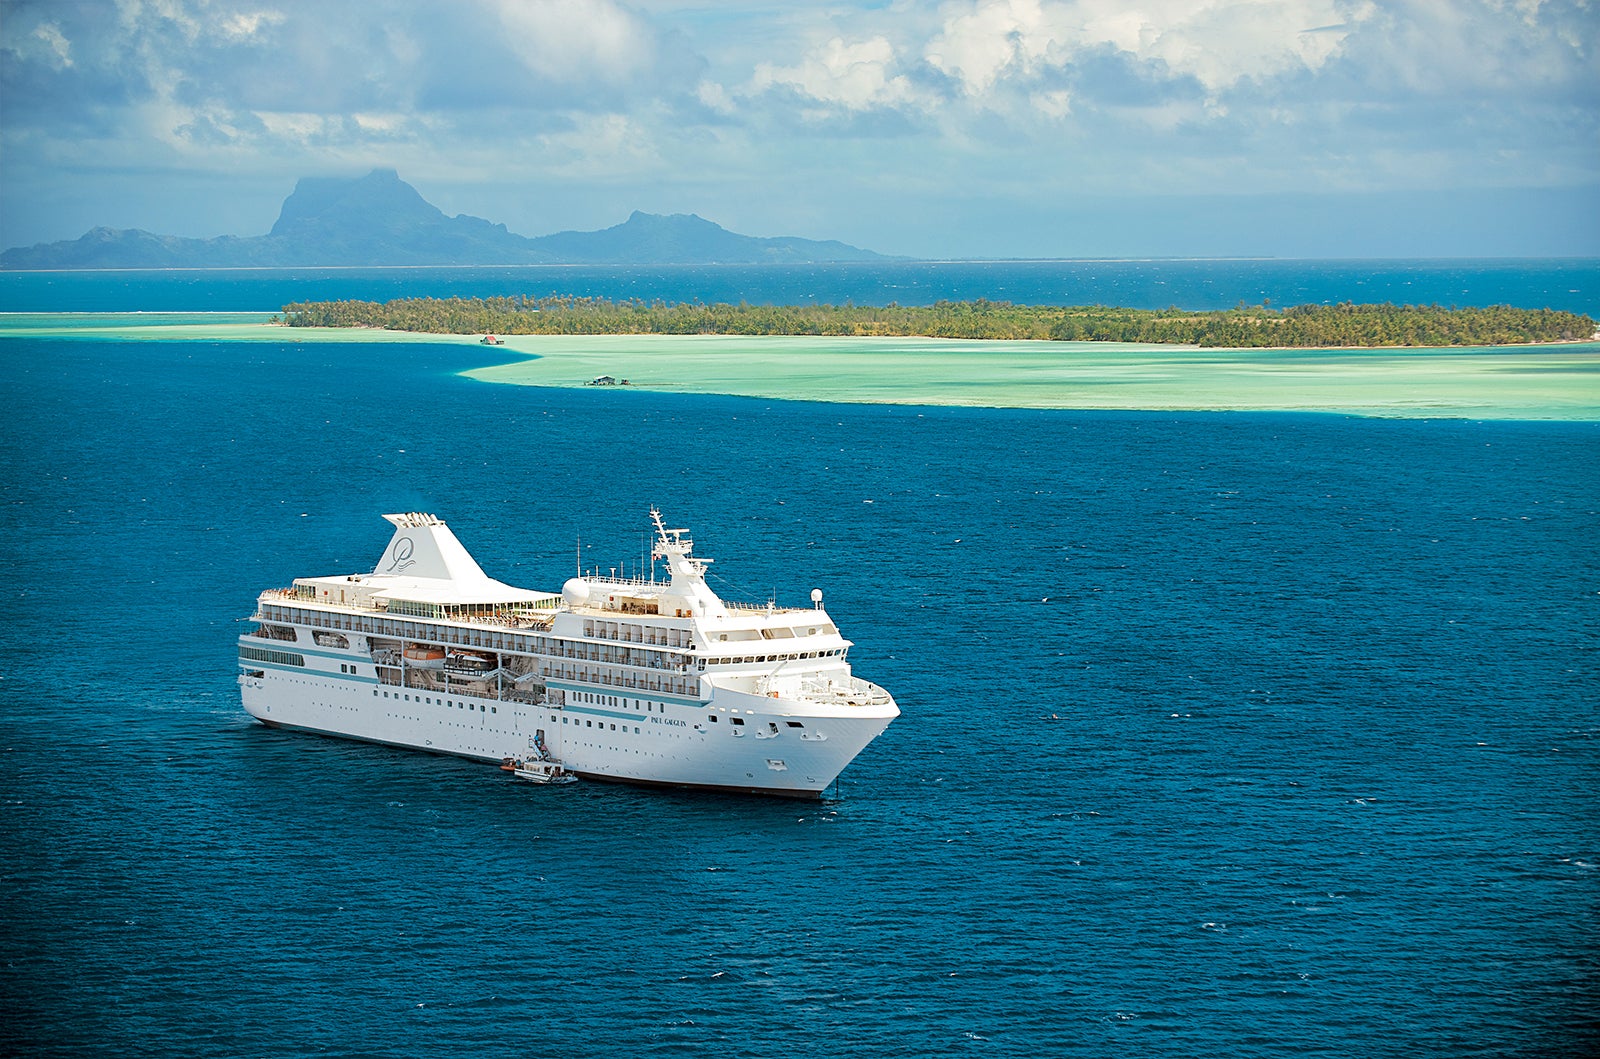 Paul Gauguin Society cruise loyalty program: Everything you need to know